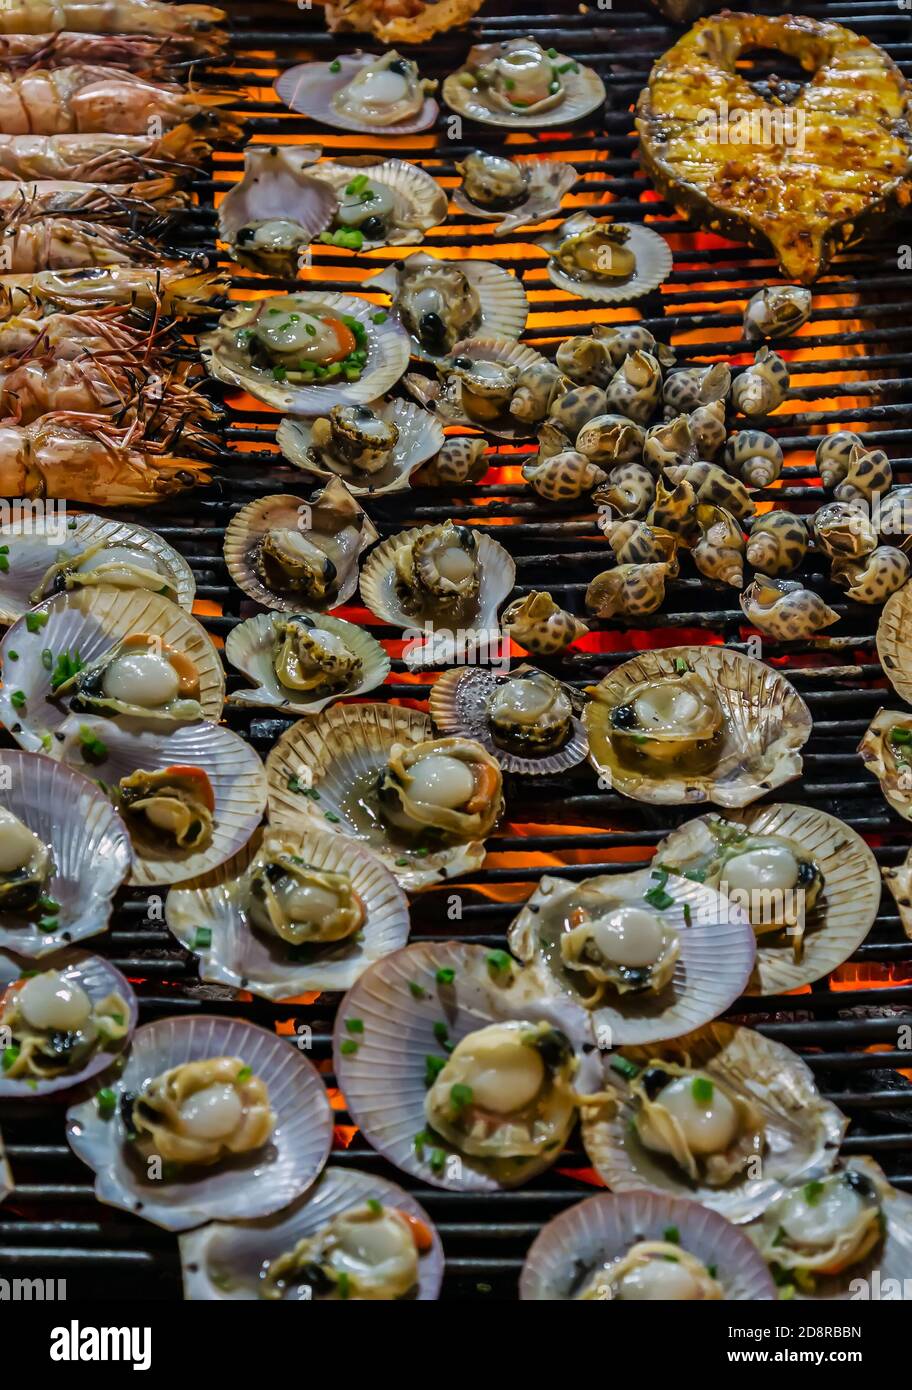 https://c8.alamy.com/comp/2D8RBBN/grilled-fresh-seafood-scallop-food-raw-background-seashell-clams-fish-meat-oyster-2D8RBBN.jpg